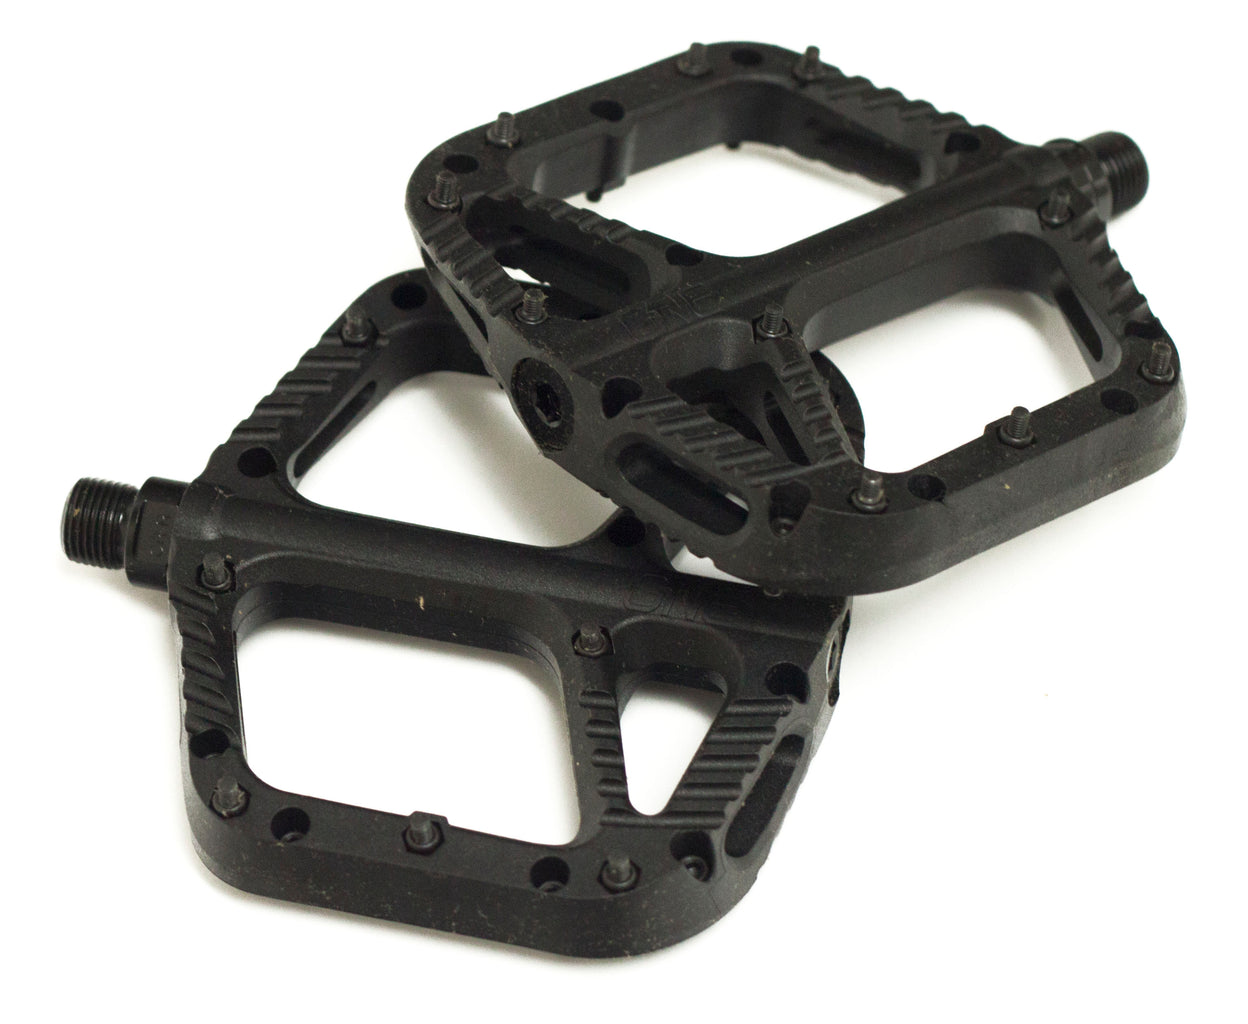 Universal Cycles -- Reverse Components Black One Platform Pedals